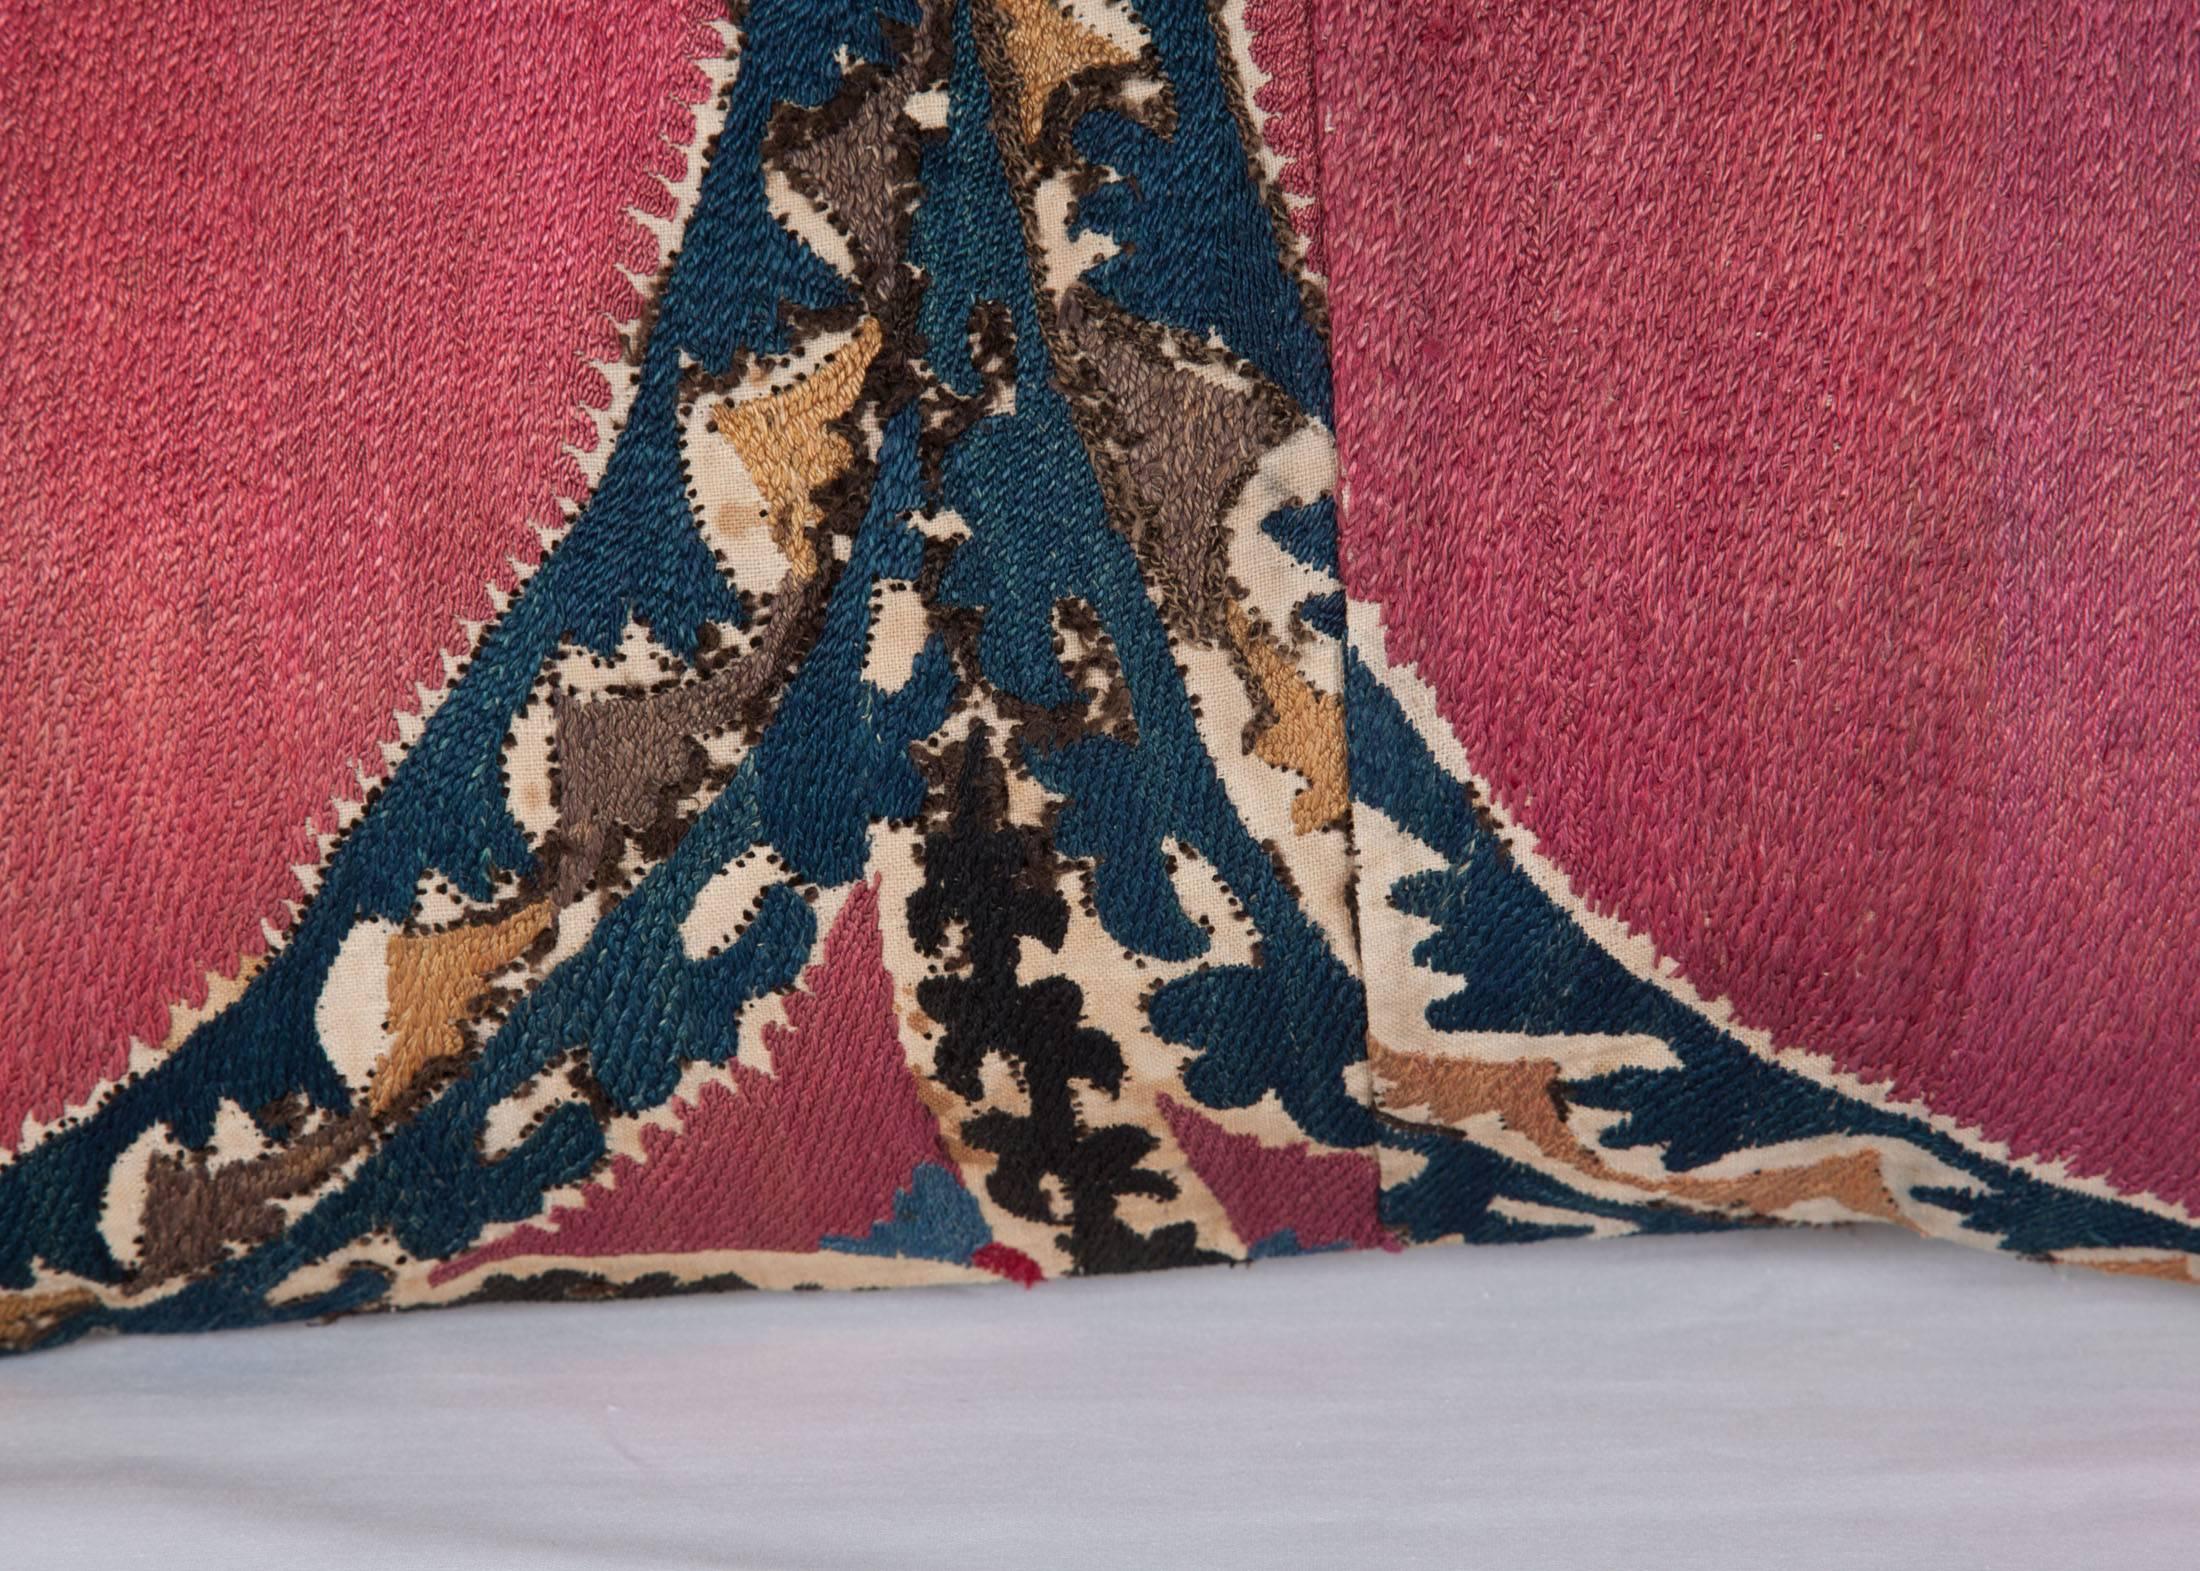 The pillow is made out of a 19th century Uzbek Tashkent Suzani. 
It does not come with an insert but it comes with a bag made to the size and out of cotton to accommodate the filling.
The backing is made of linen.

Please note filling is not